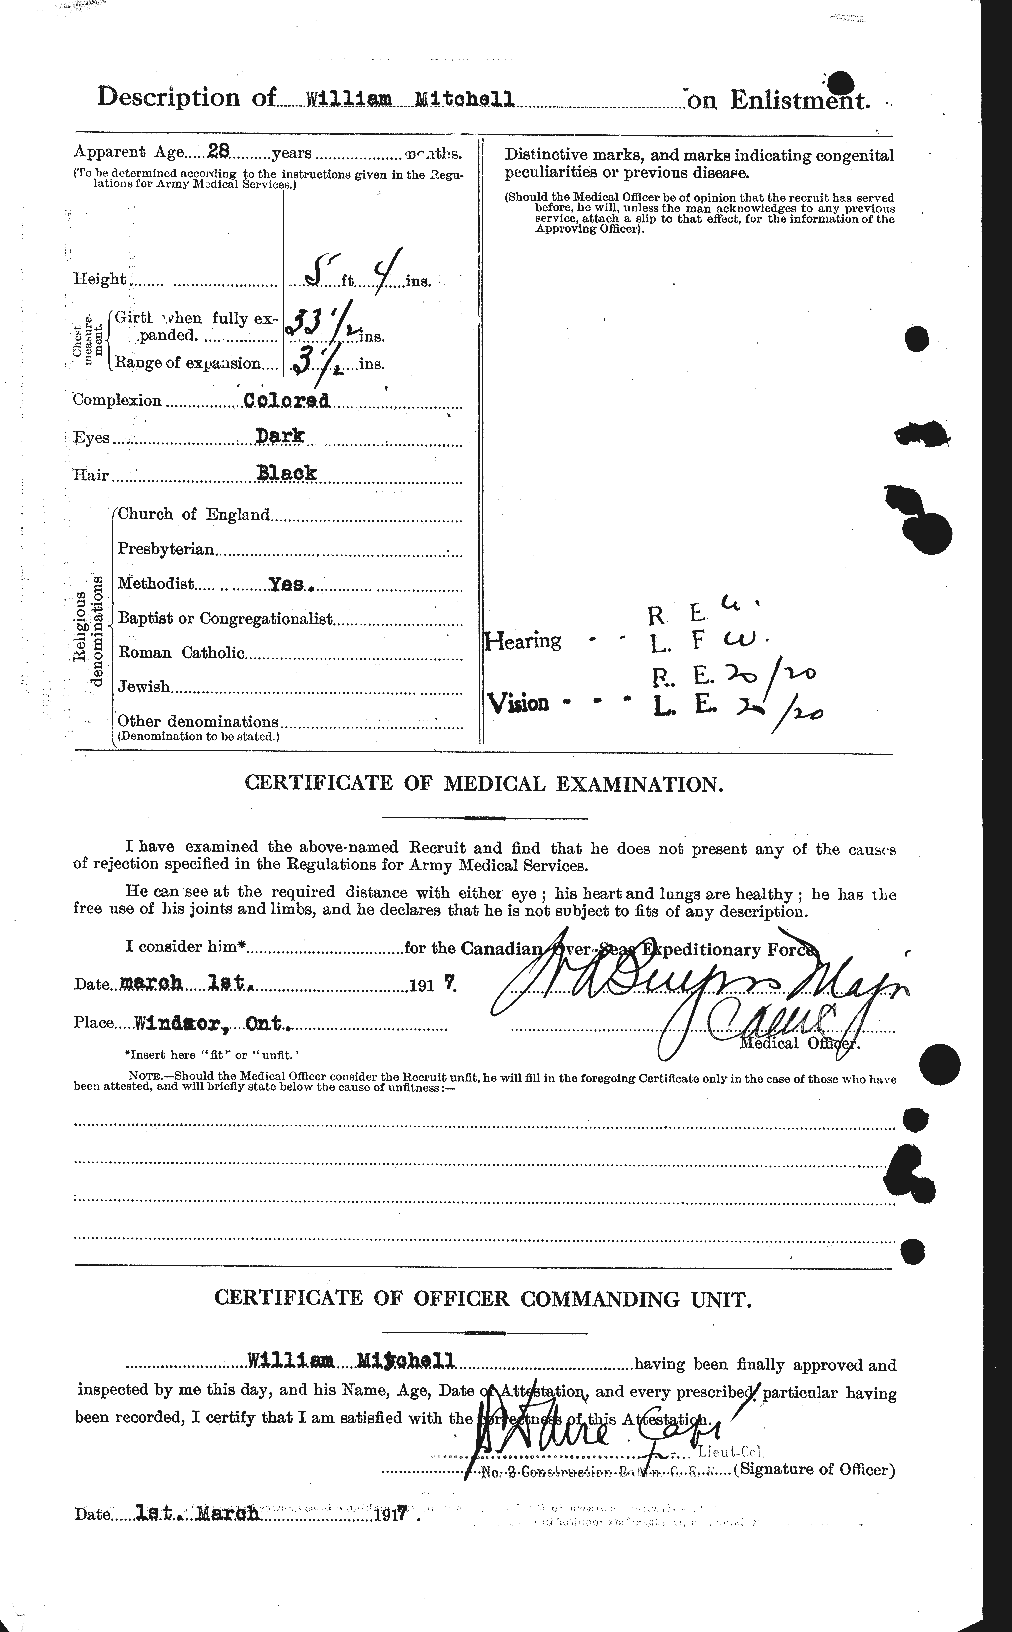 Personnel Records of the First World War - CEF 501901b